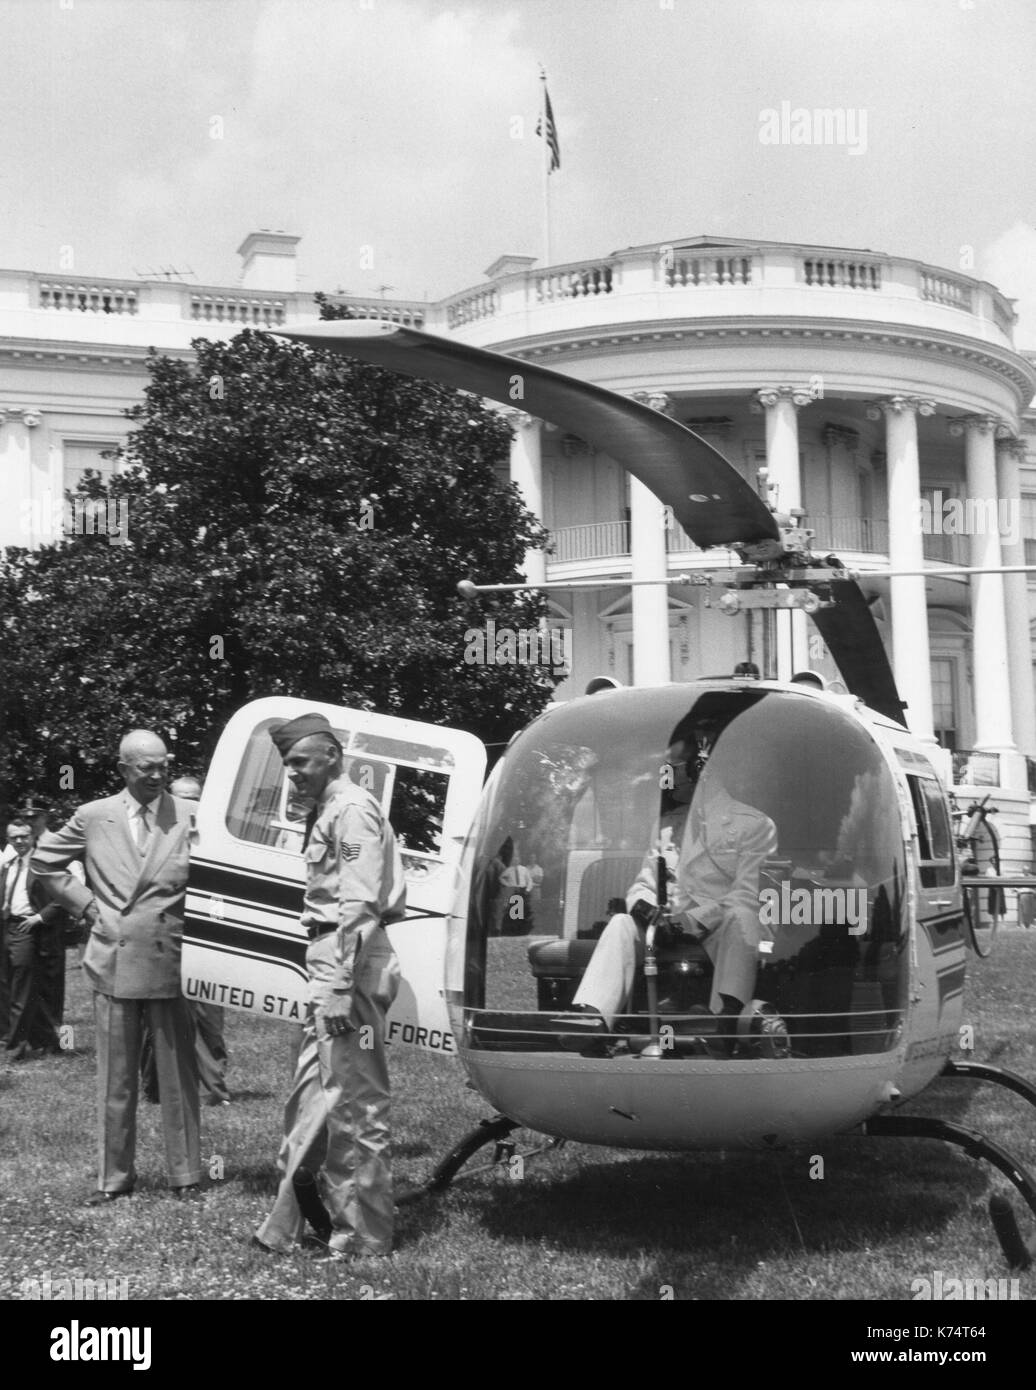 President Dwight D Eisenhower prepared to board a helicopter on the White House grounds to leave for a 'relocation point' as part of nation-wide civil defense exercises, Washington, DC, 7/12/1957. Stock Photo